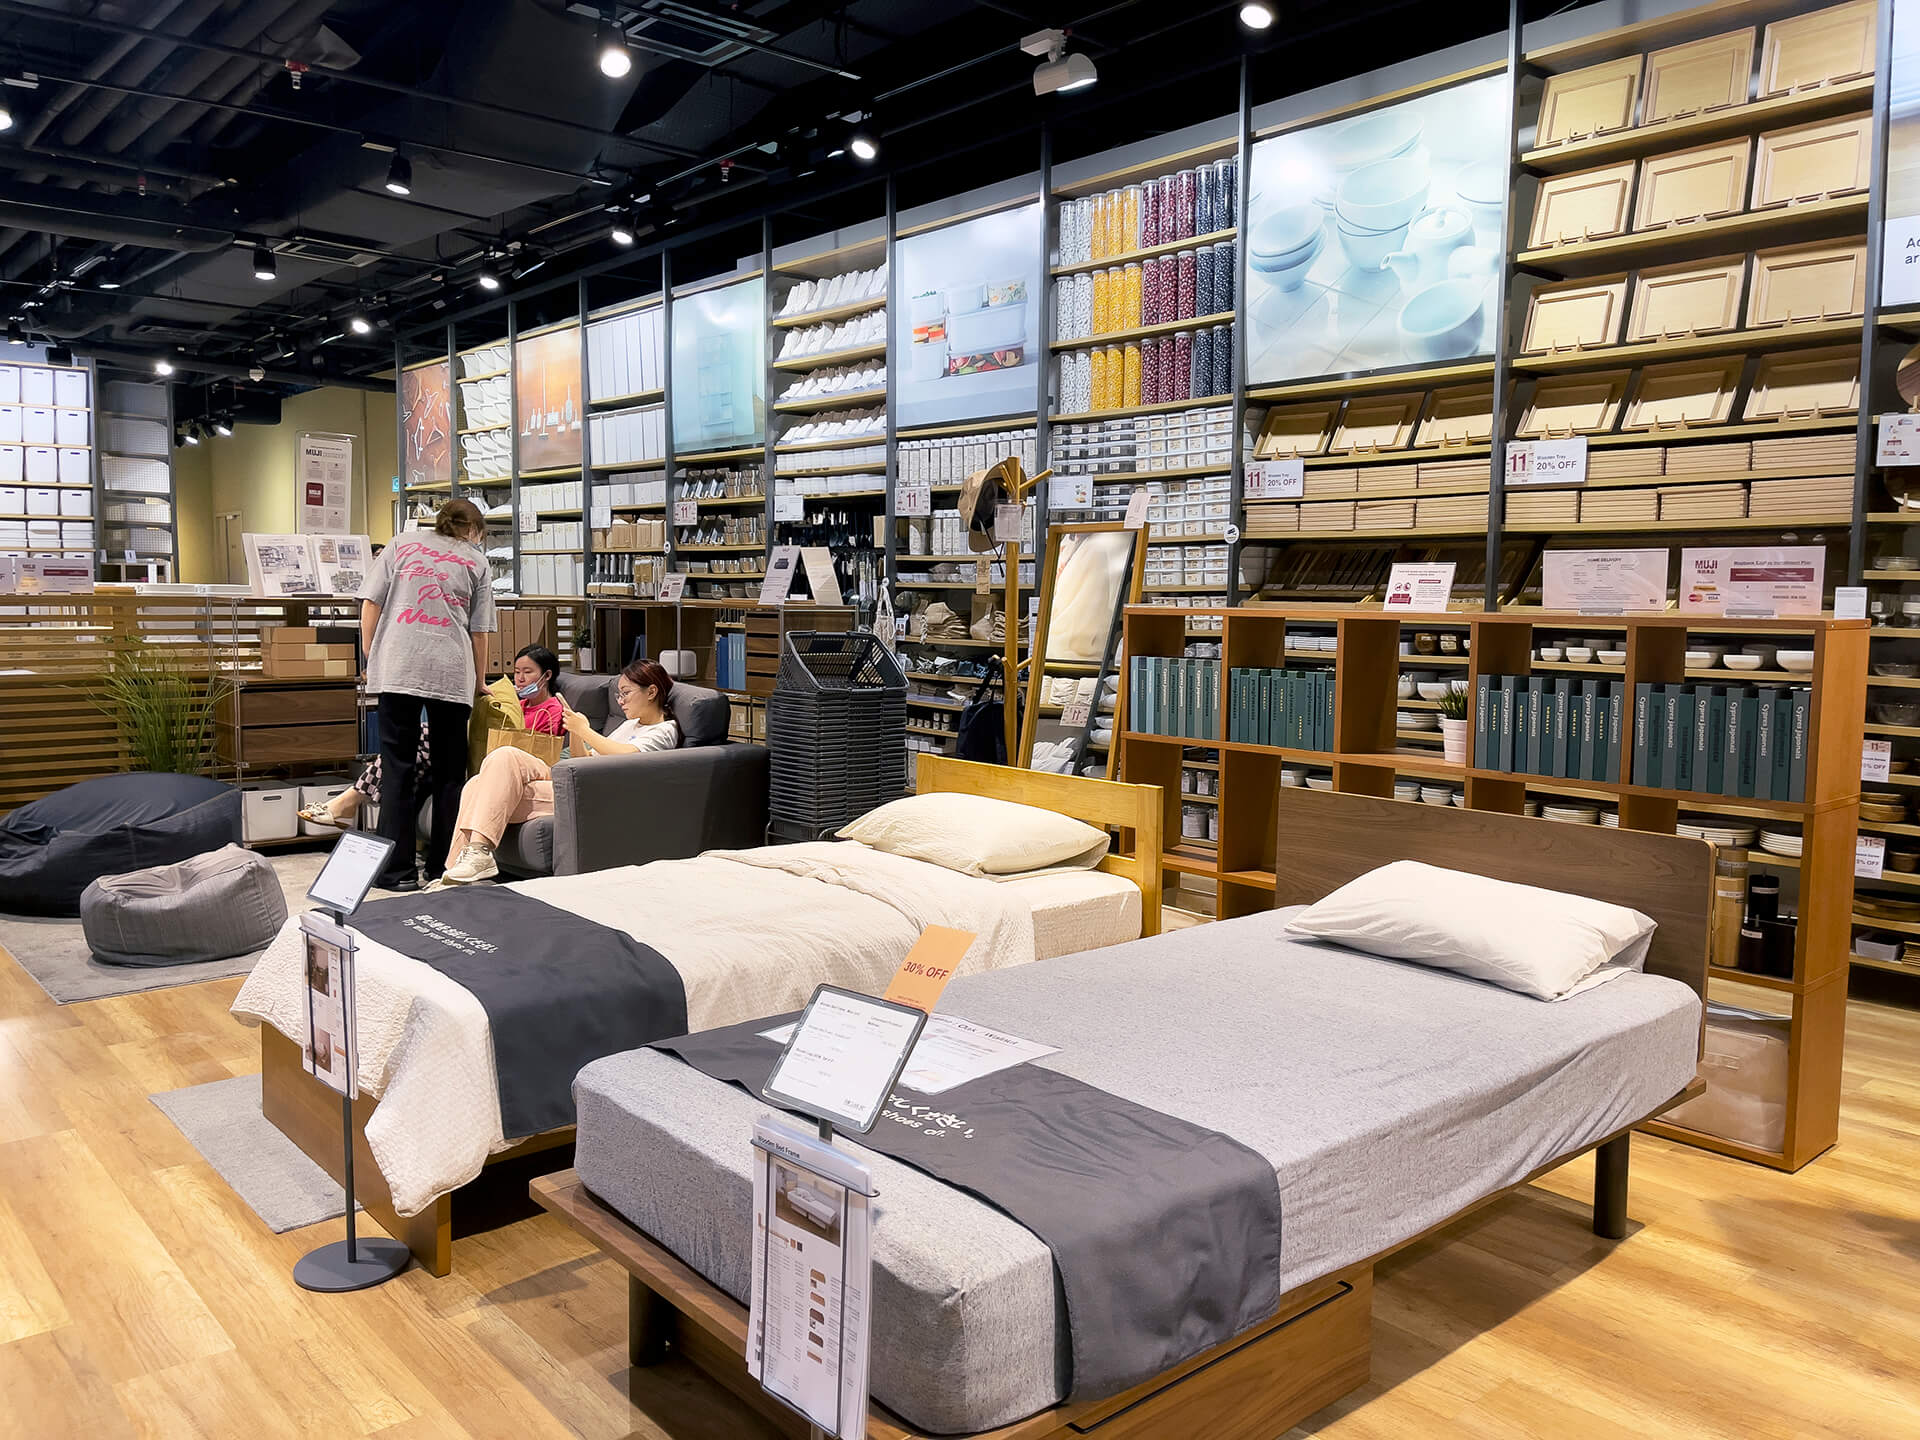 Doesn’t Muji just make you want to purchase everything?